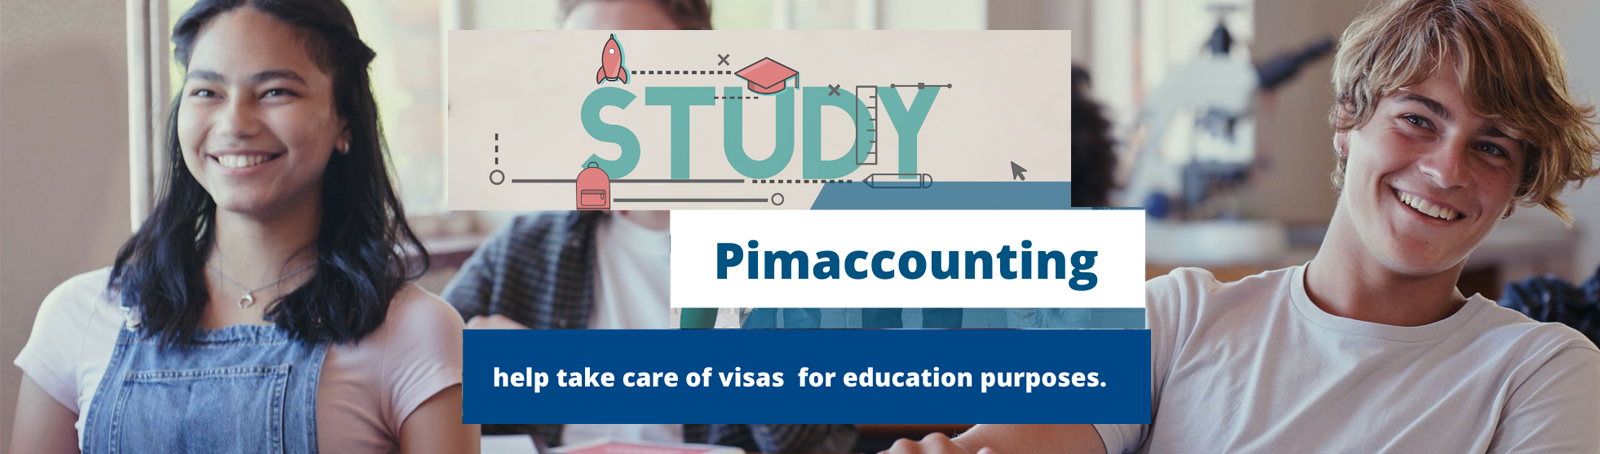 Pimaccounting helps take care of visas  for education purposes.